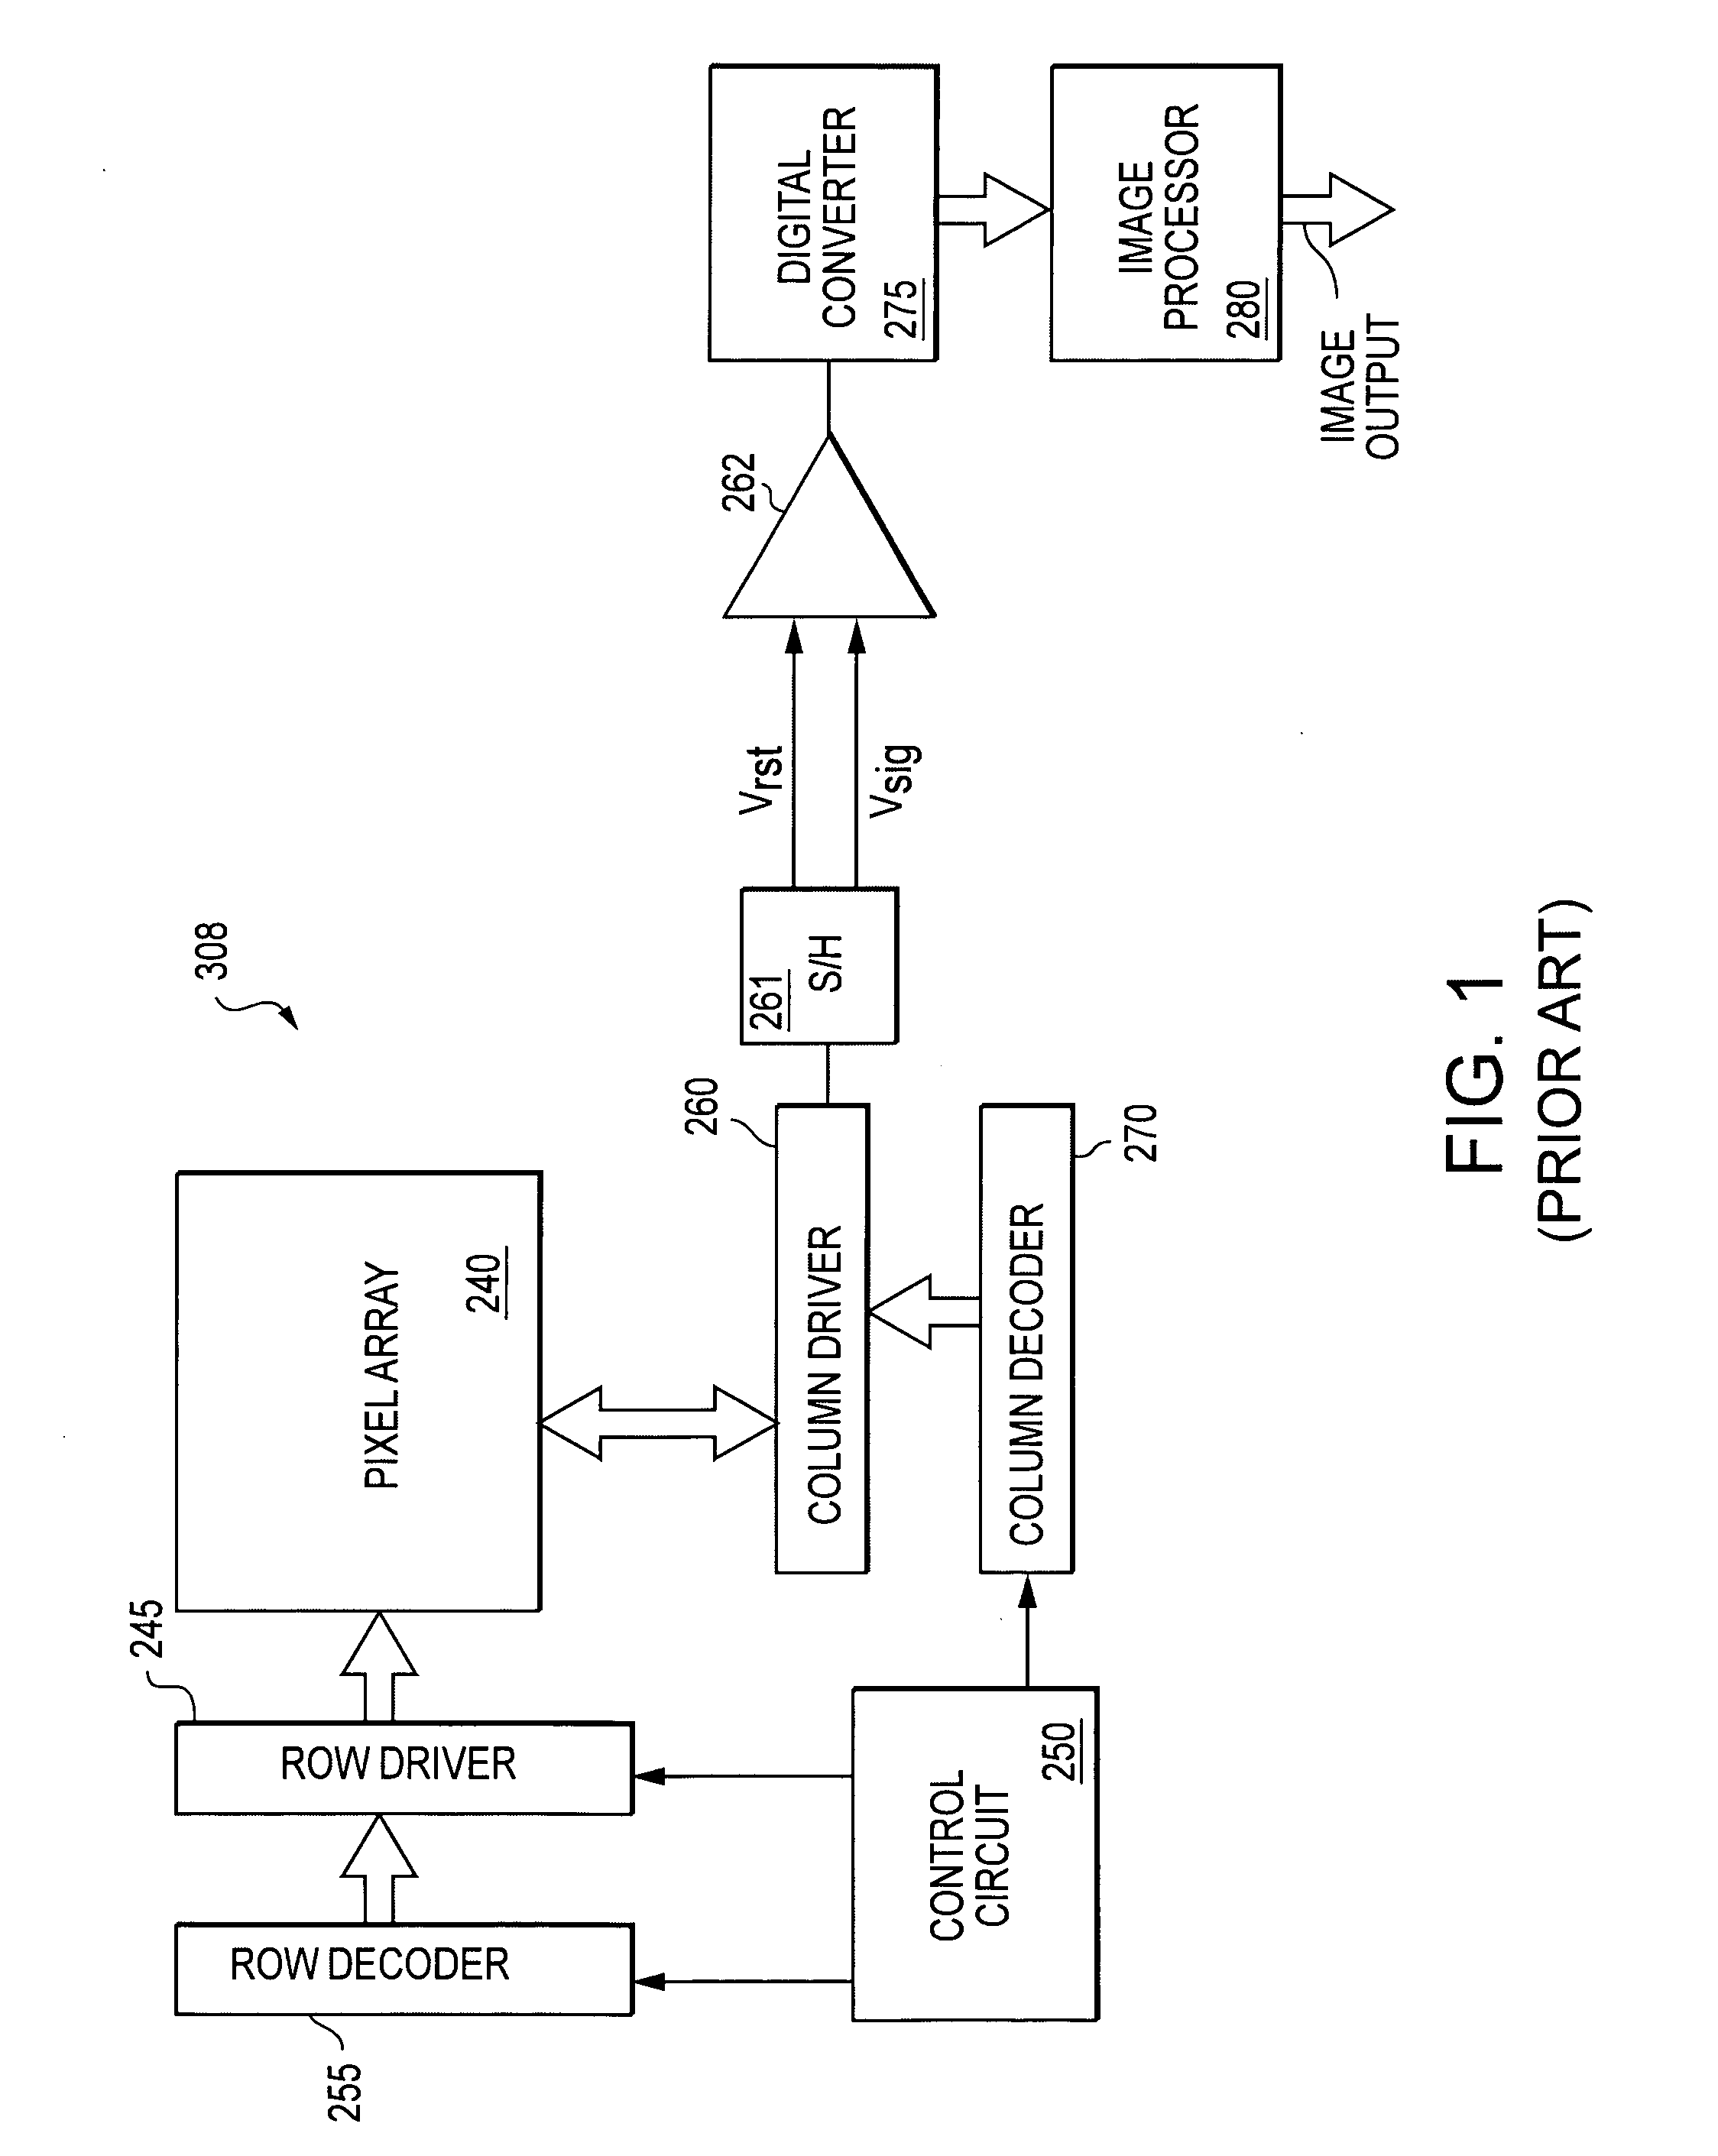 Pixel cell with a controlled output signal knee characteristic response